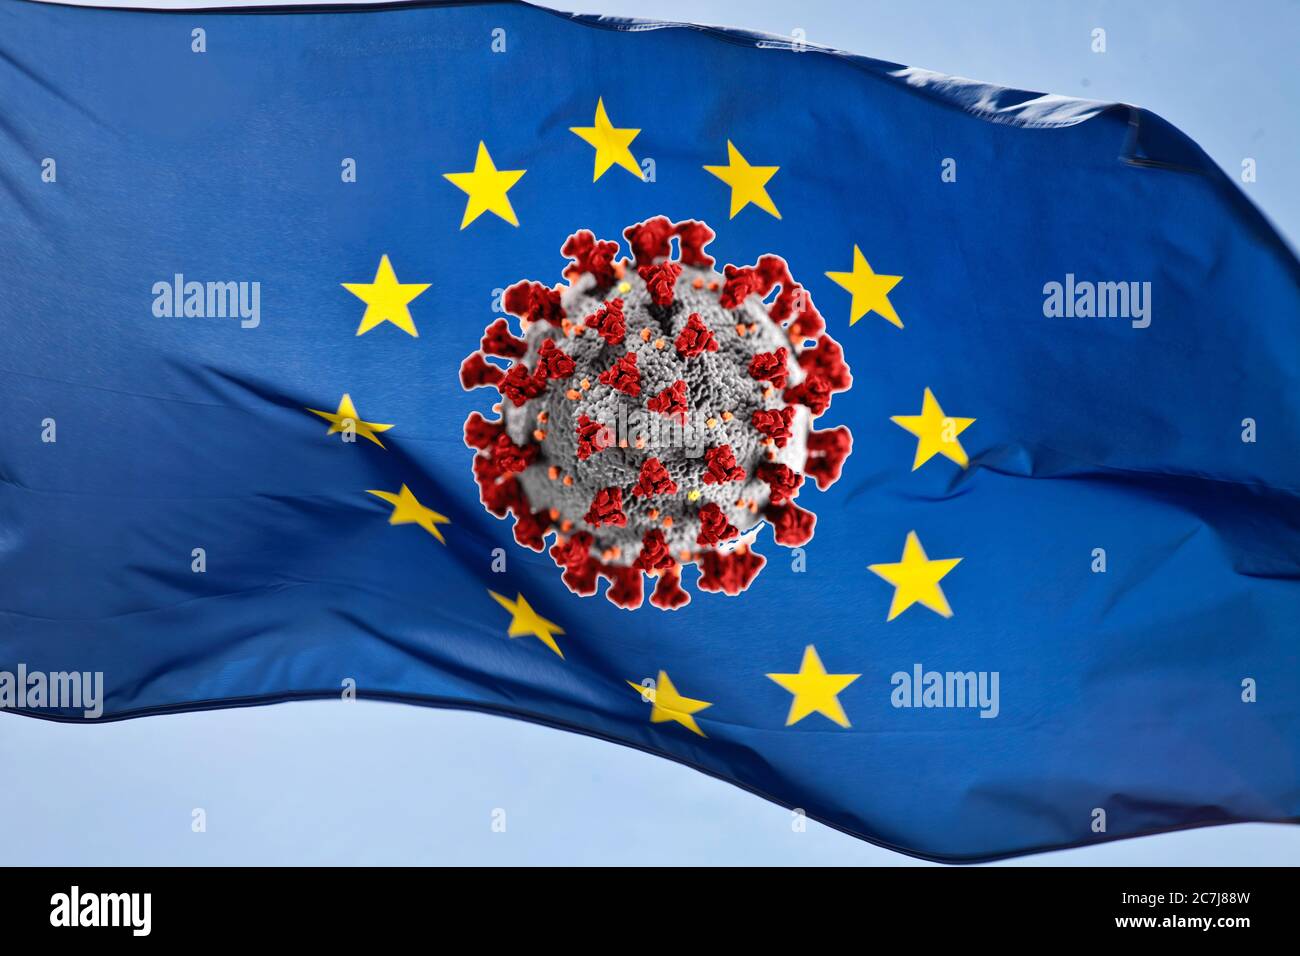 flag of the EU with coronavirus blowing in the wind, symbol for pandemic in the EU, Germany Stock Photo